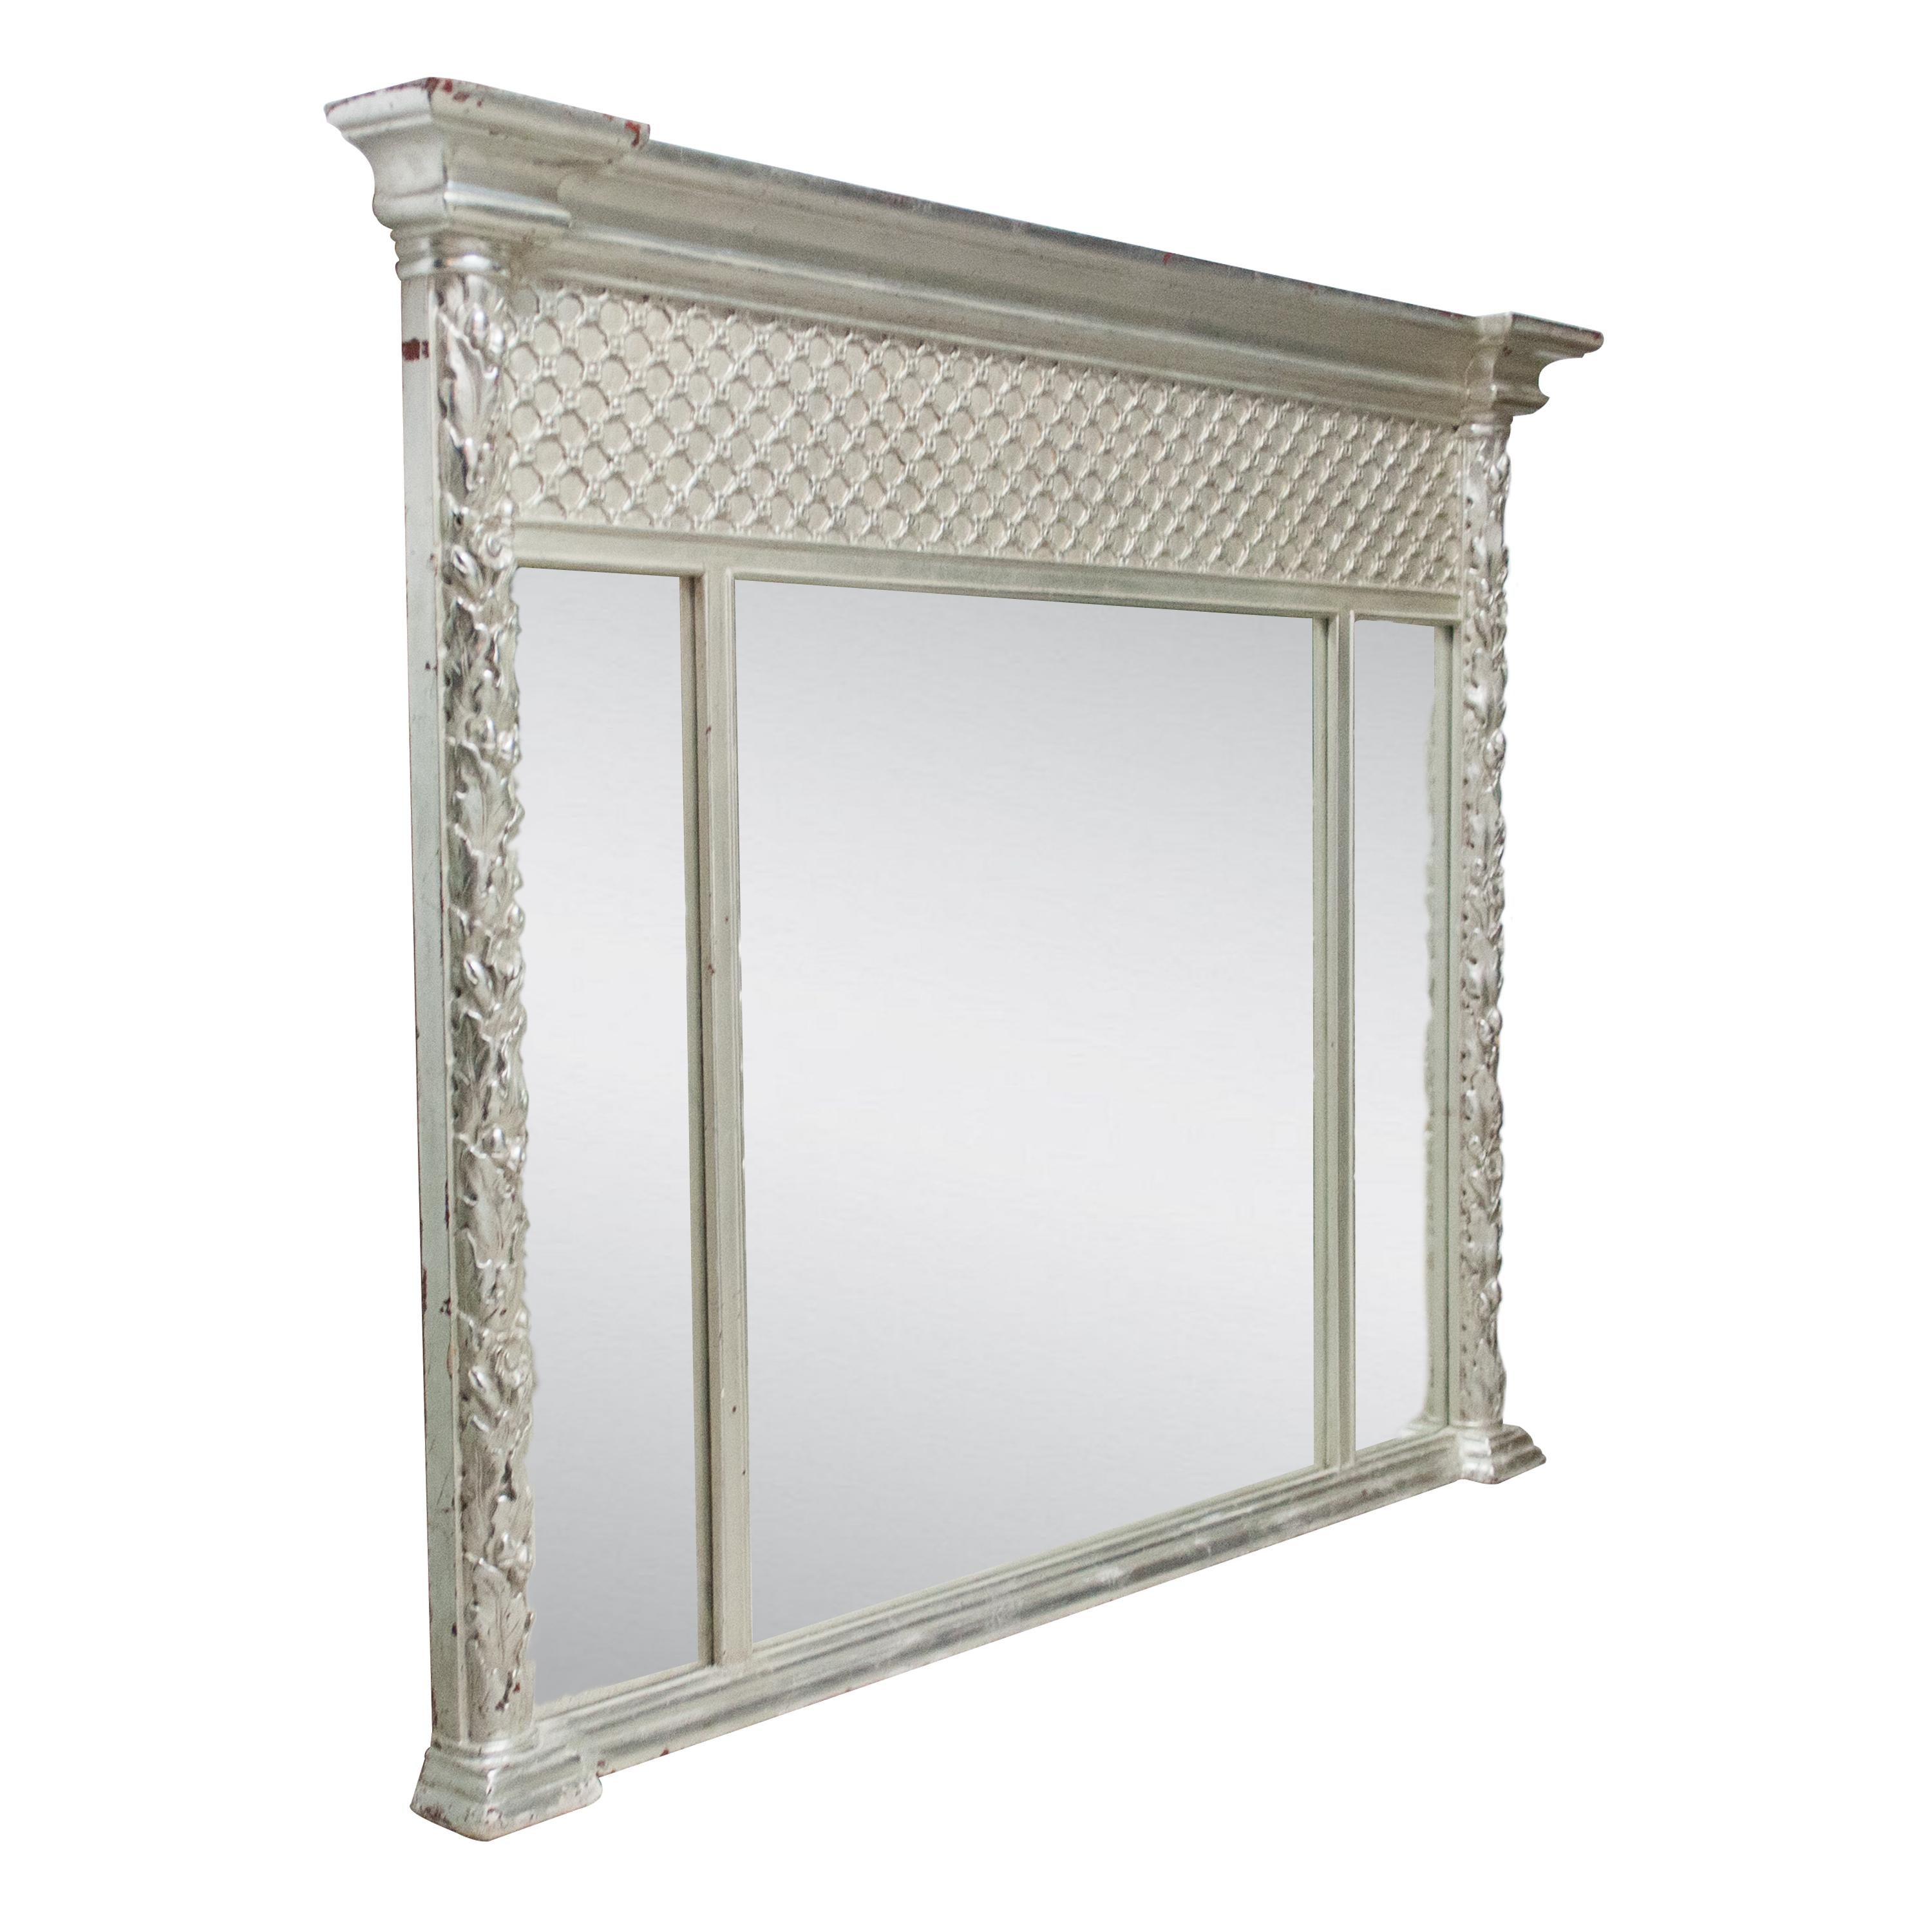 Neoclassical Regency style handcrafted mirror. Rectangular triptych mirror, hand carved wooden structure with silver foiled finish. Spain, 1970.